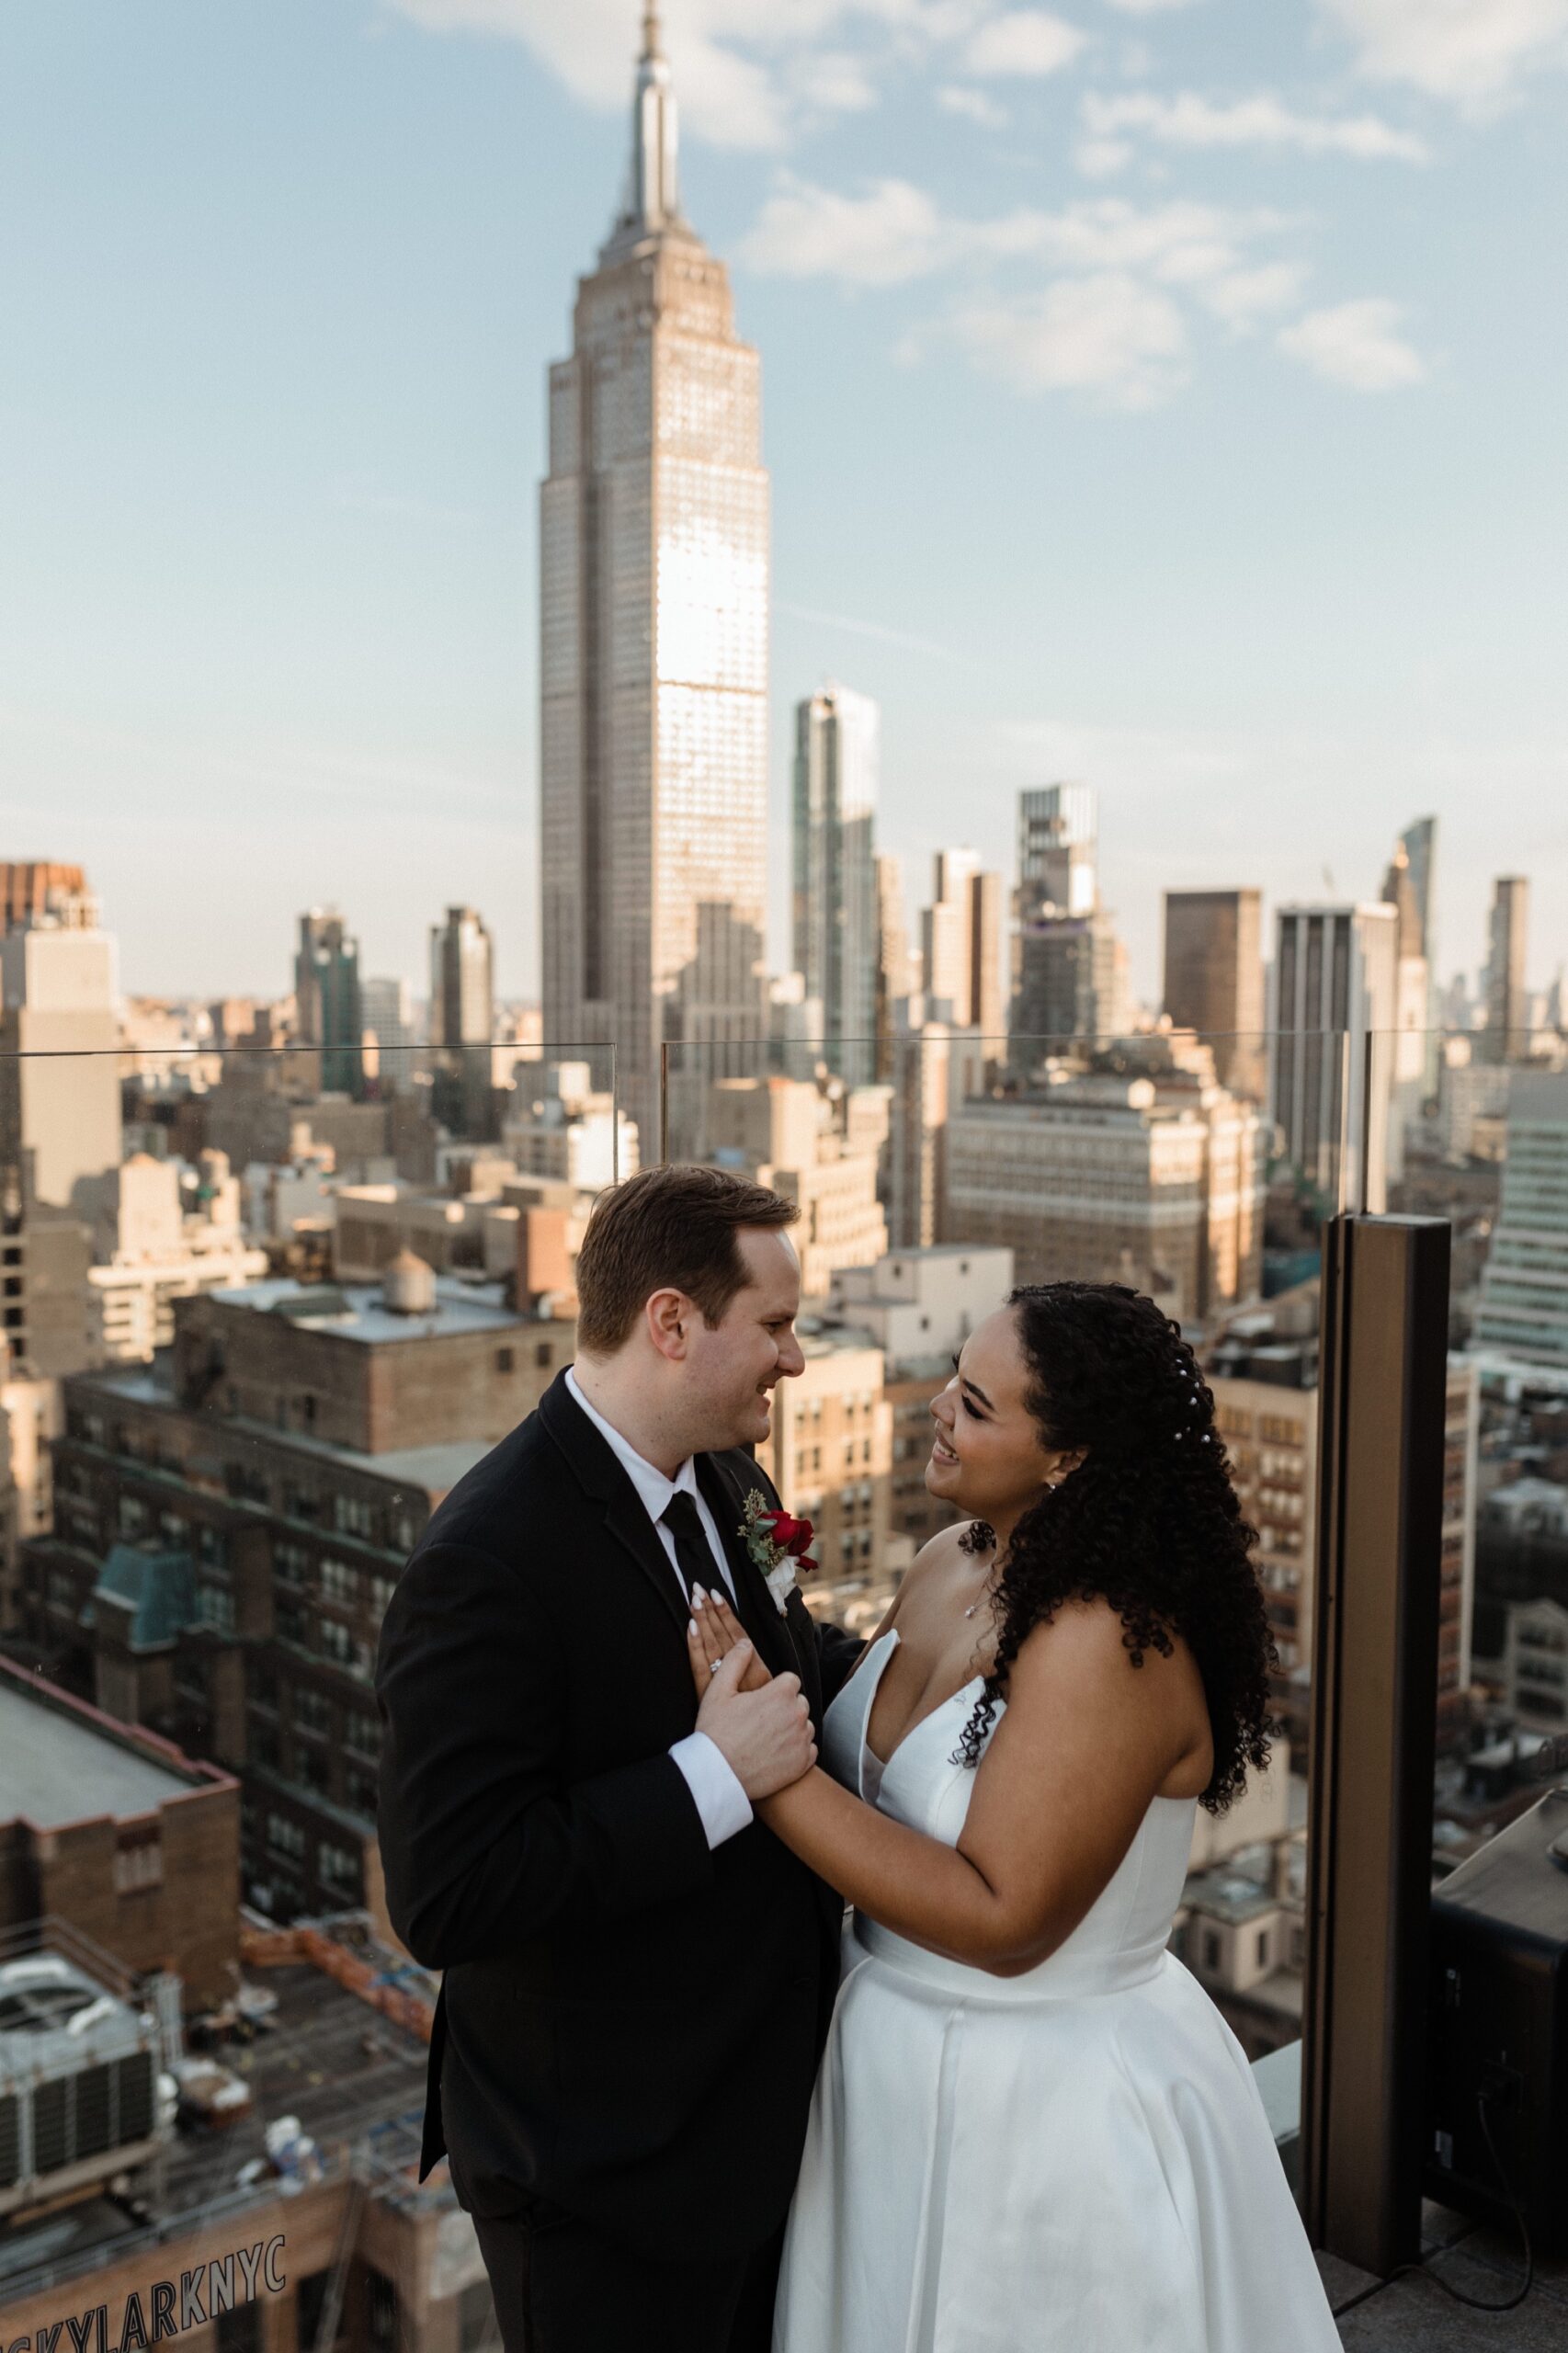 editorial wedding photo against nyc skyline during golden hour